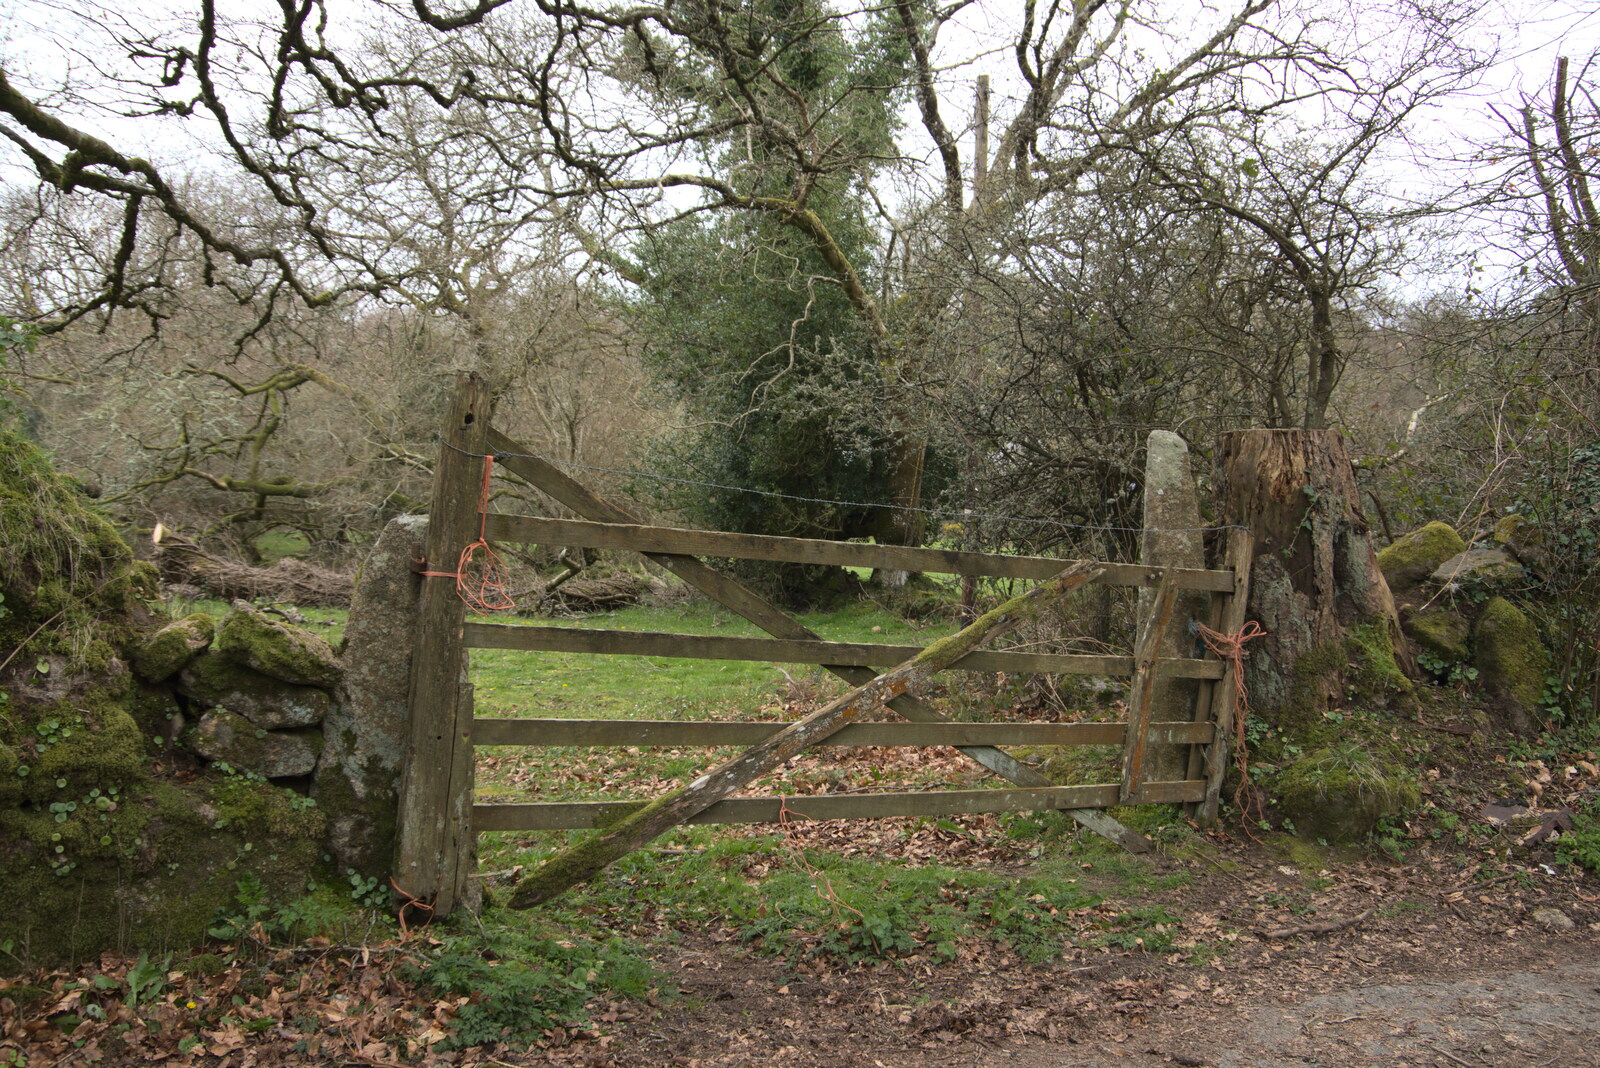 A Dartmoor gate from Easter in South Zeal and Moretonhampstead, Devon - 9th April